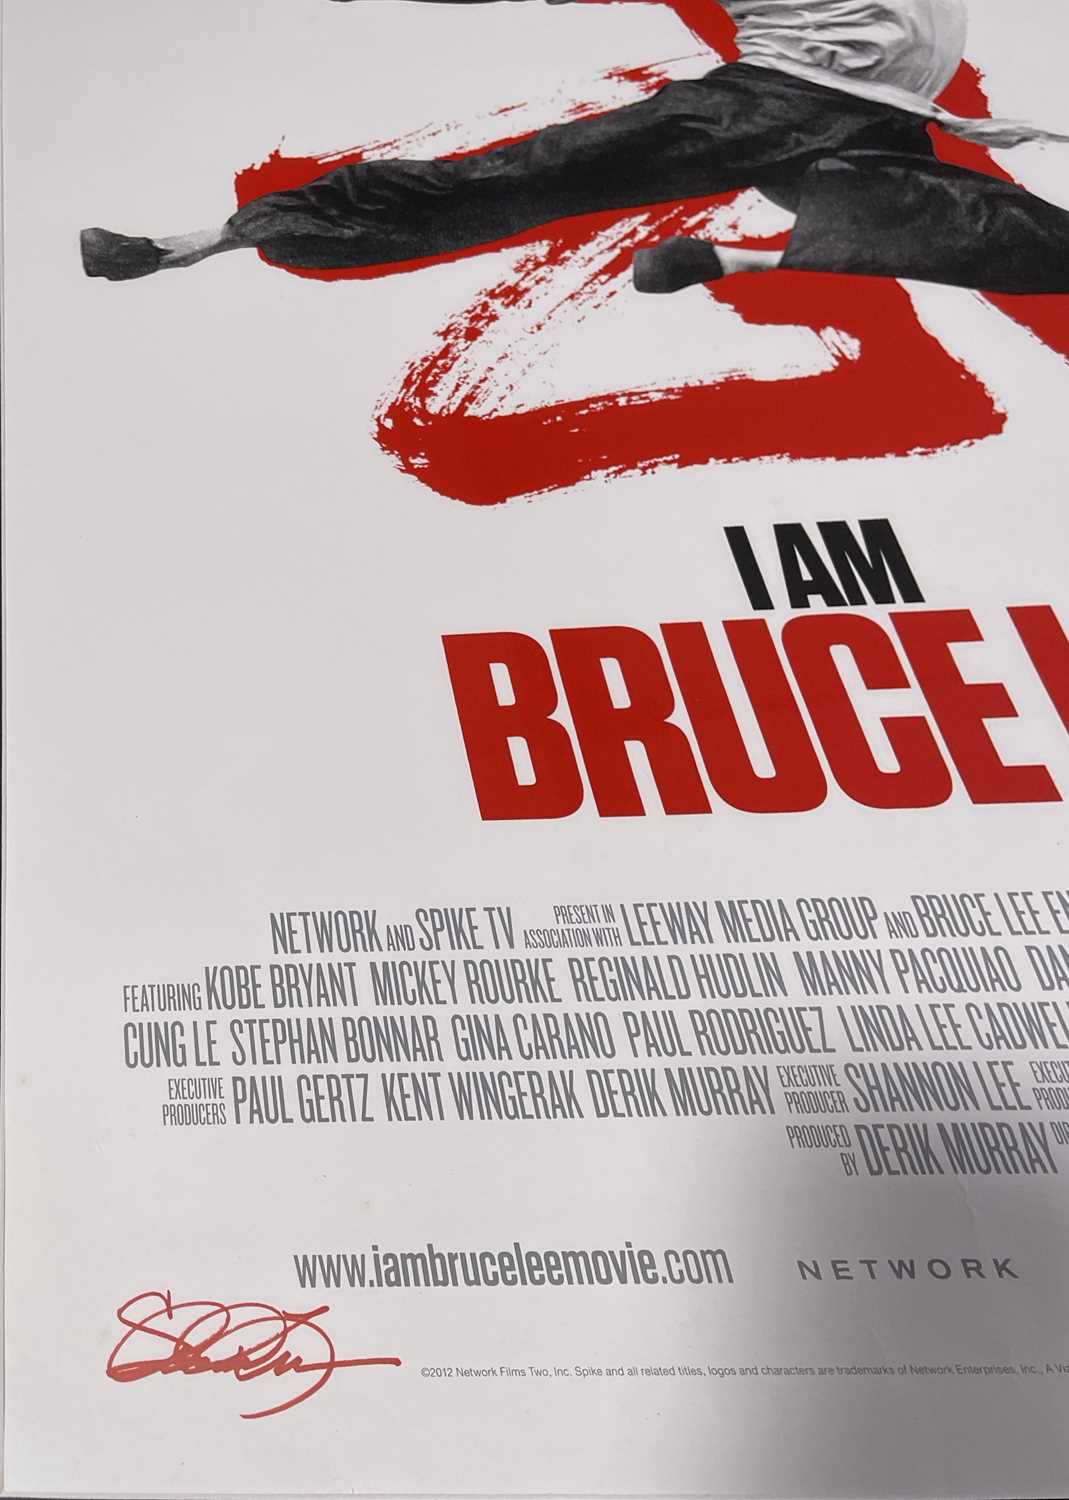 LIMITED EDITION 'I AM BRUCE LEE' POSTER. - Image 2 of 3